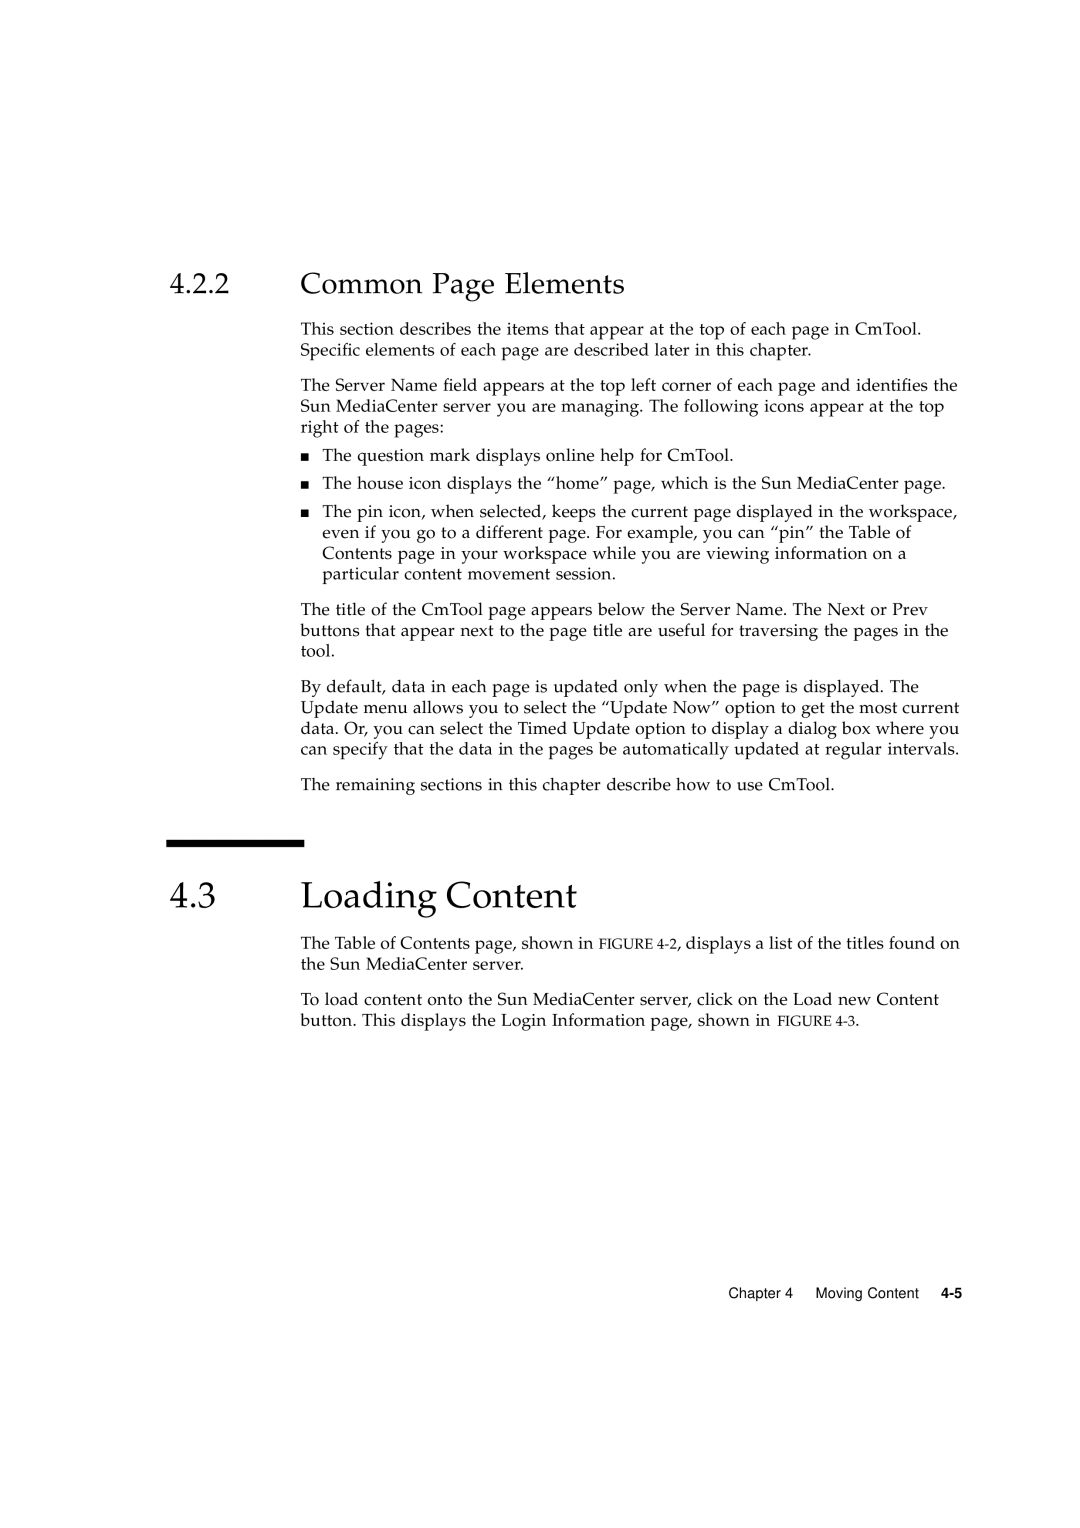 Sun Microsystems 2.1 manual Loading Content, Common Page Elements 